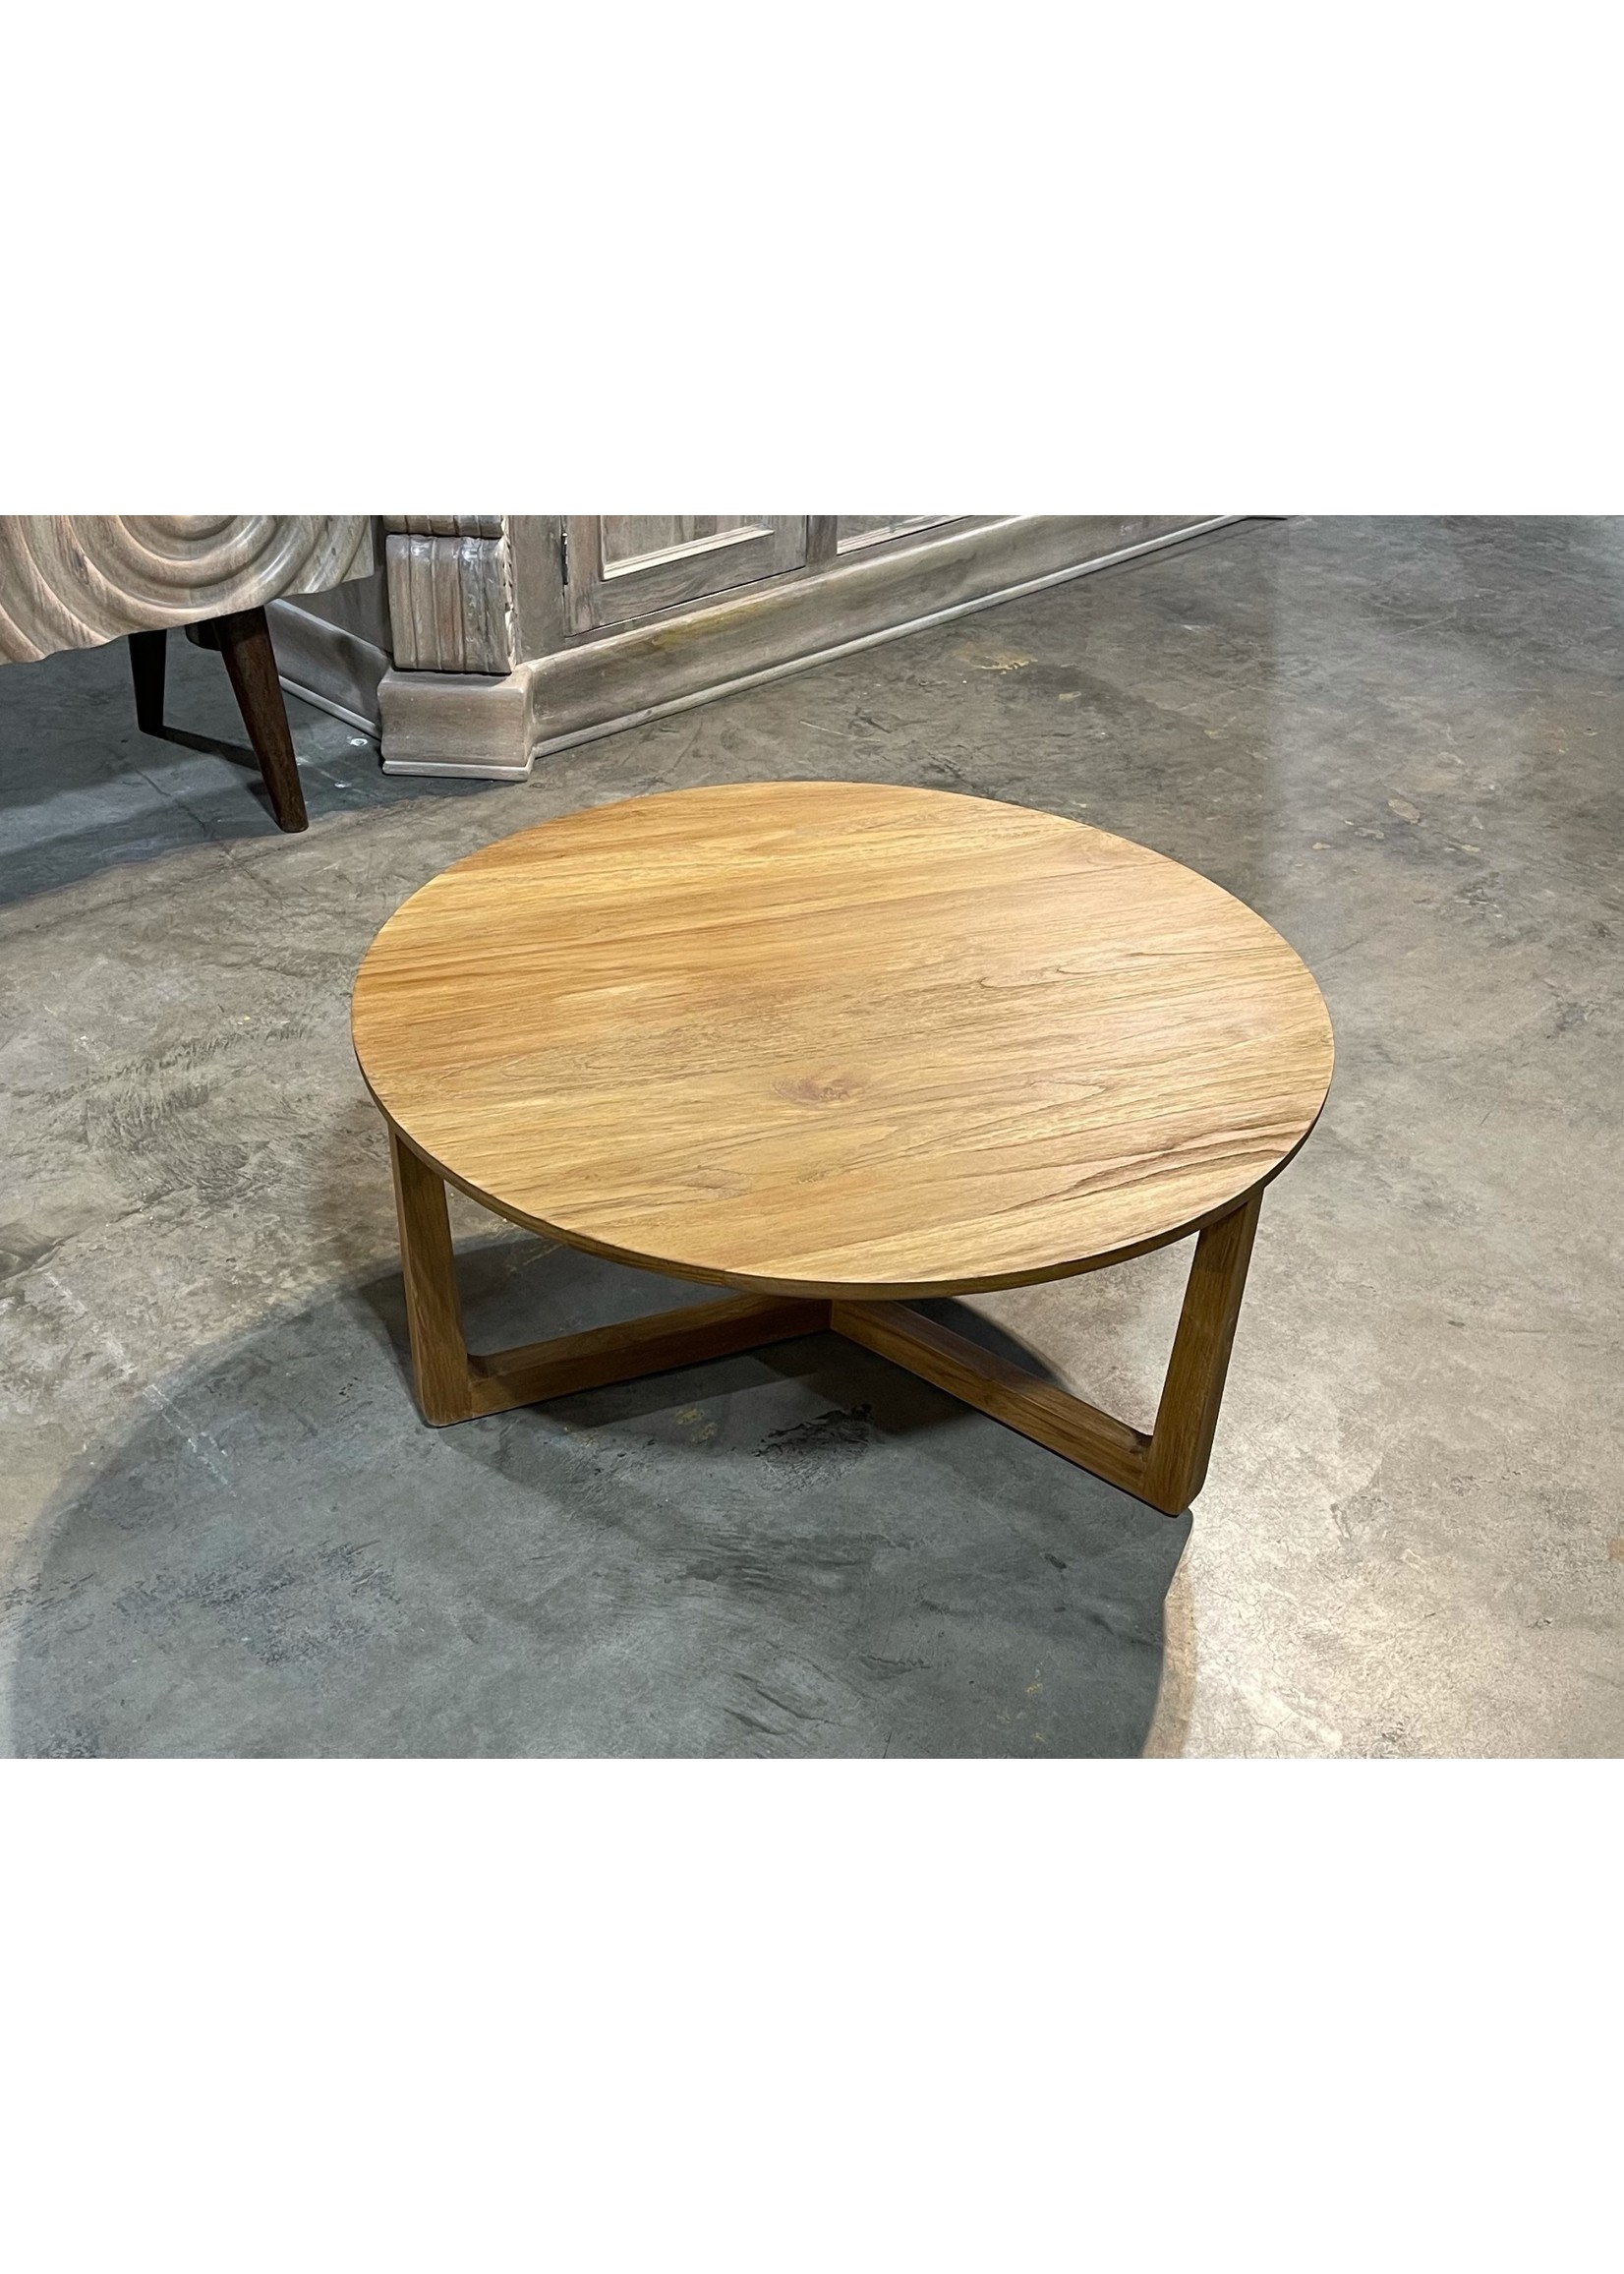 Calvin Lily Pad SM Coffee Table - 25"